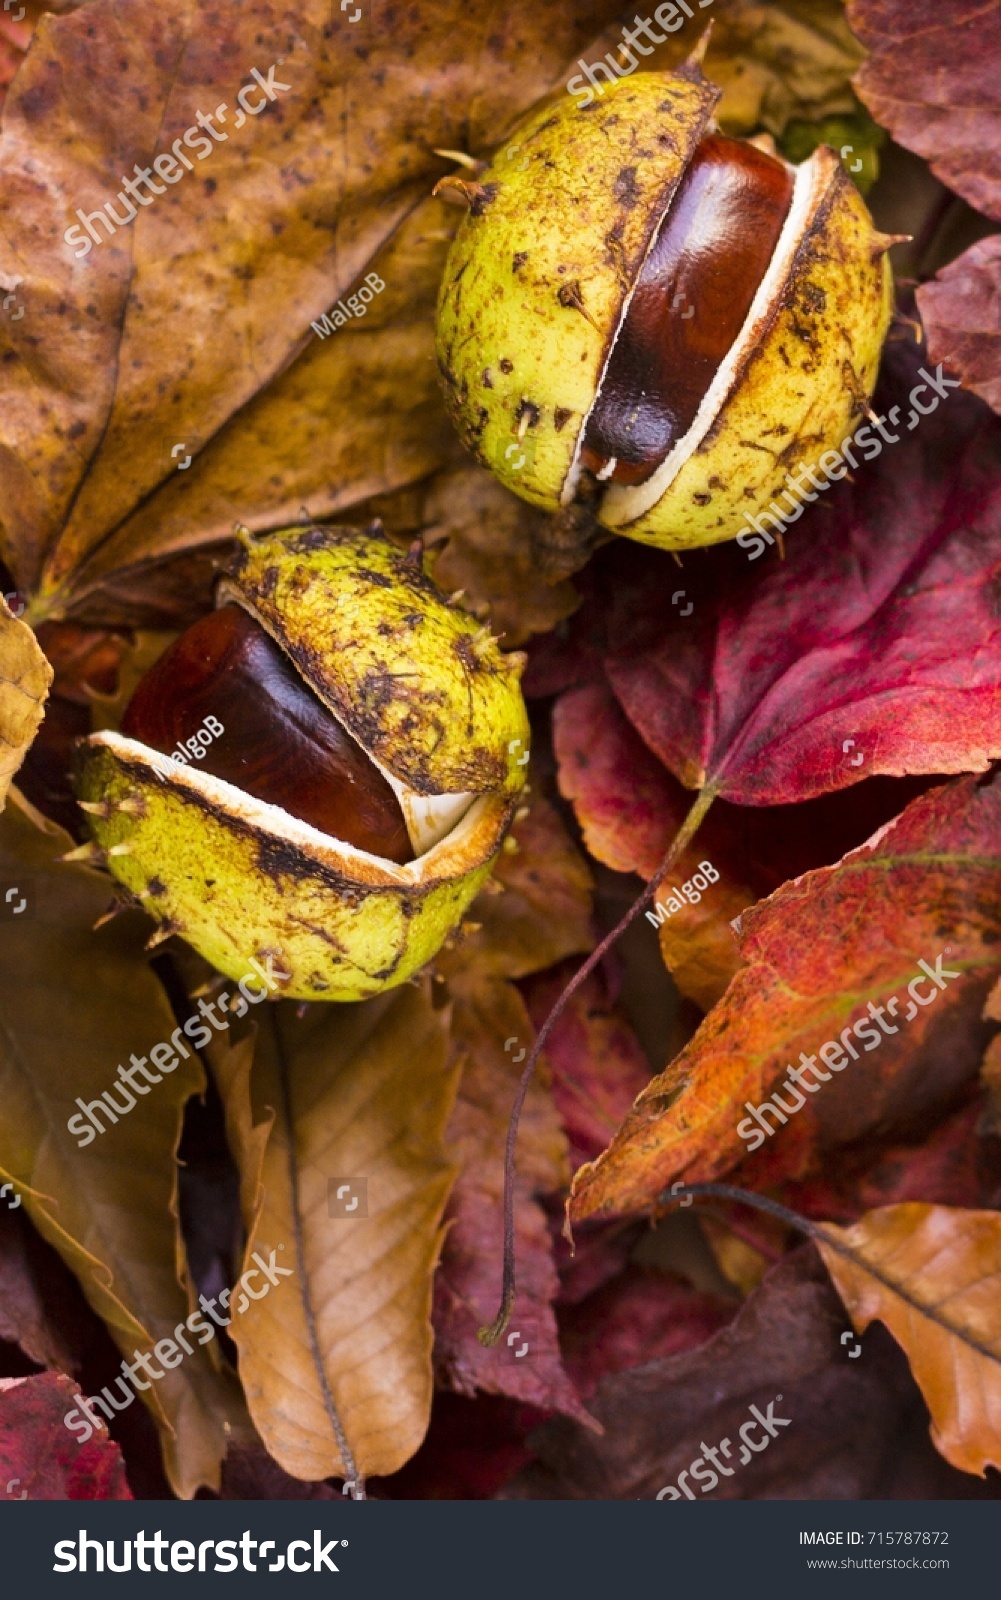 Close up photo of two conkers, chestnuts, buckeyes among passel dry autumn fall foliages in warm colors. #715787872